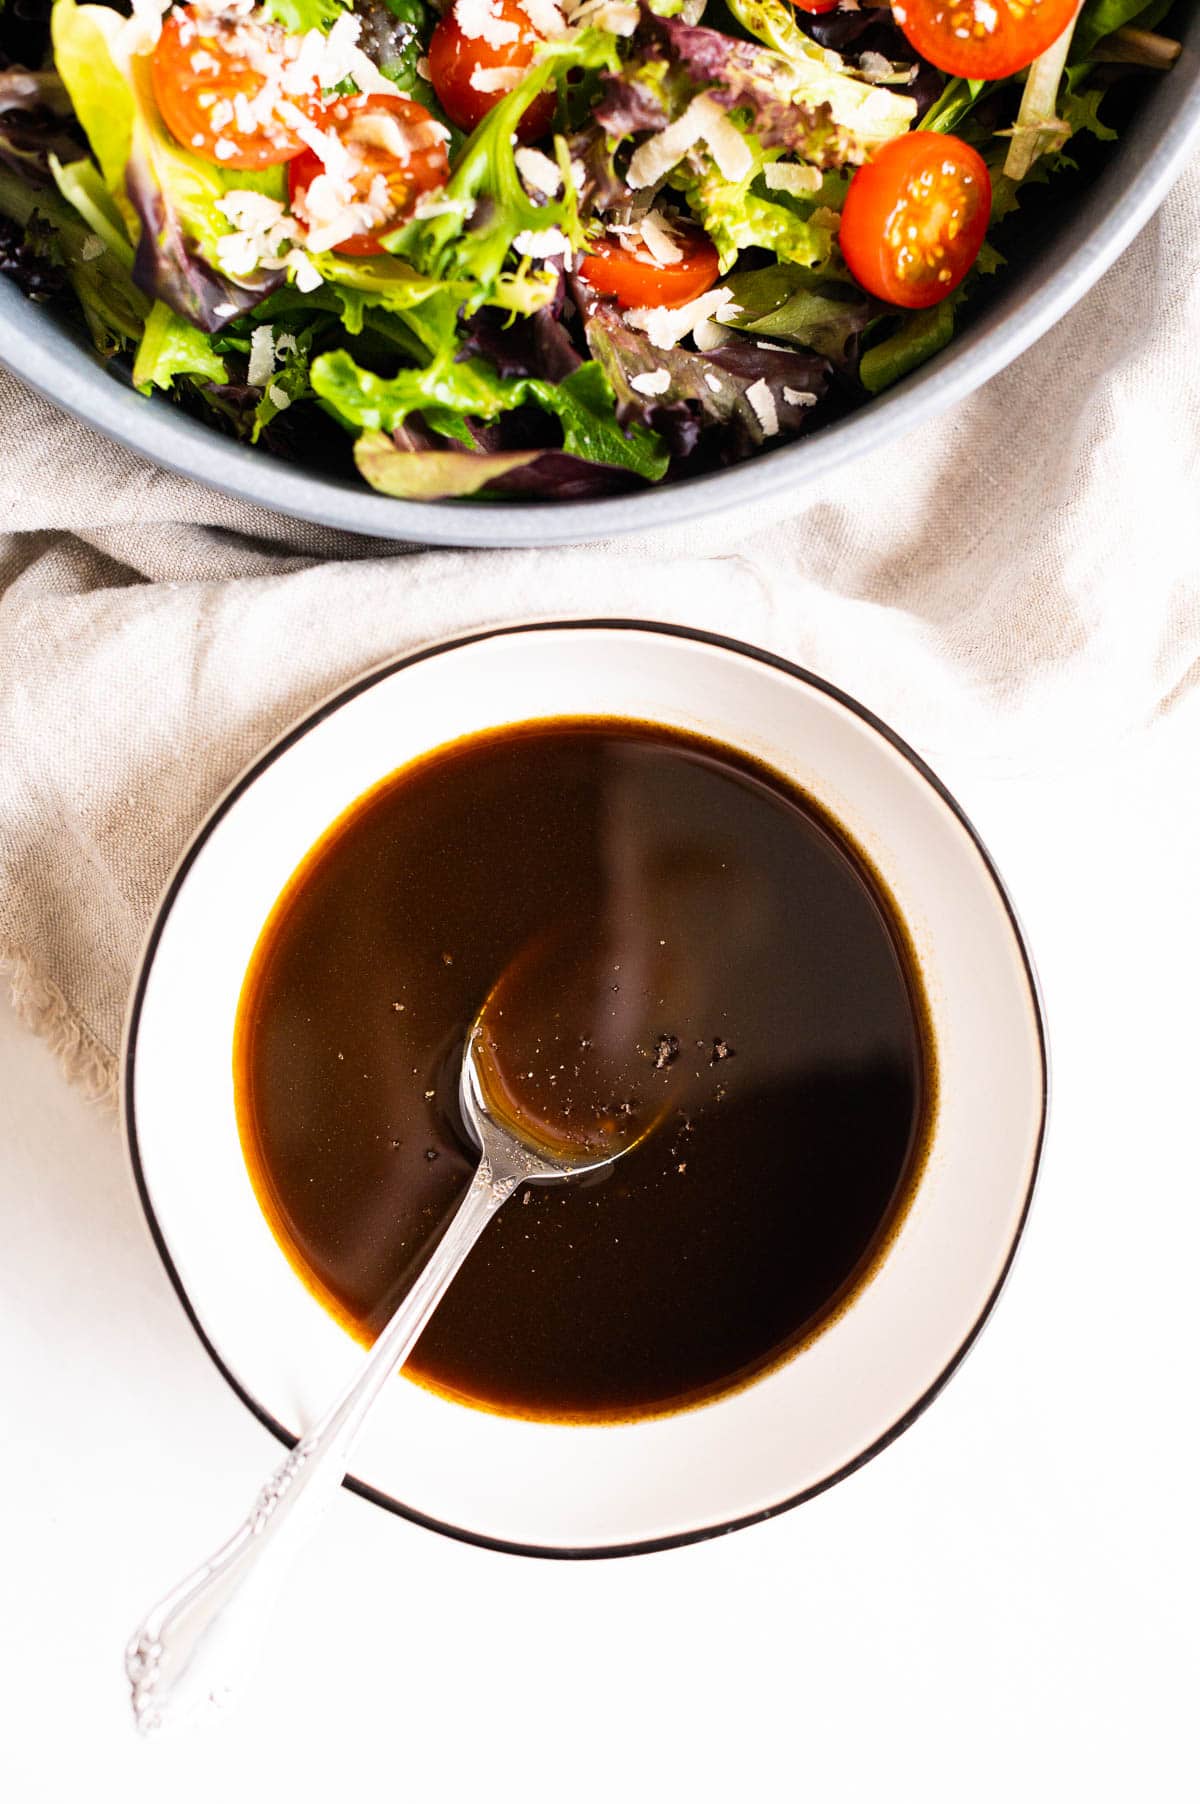 Balsamic vinaigrette in white bowl with a spoon.